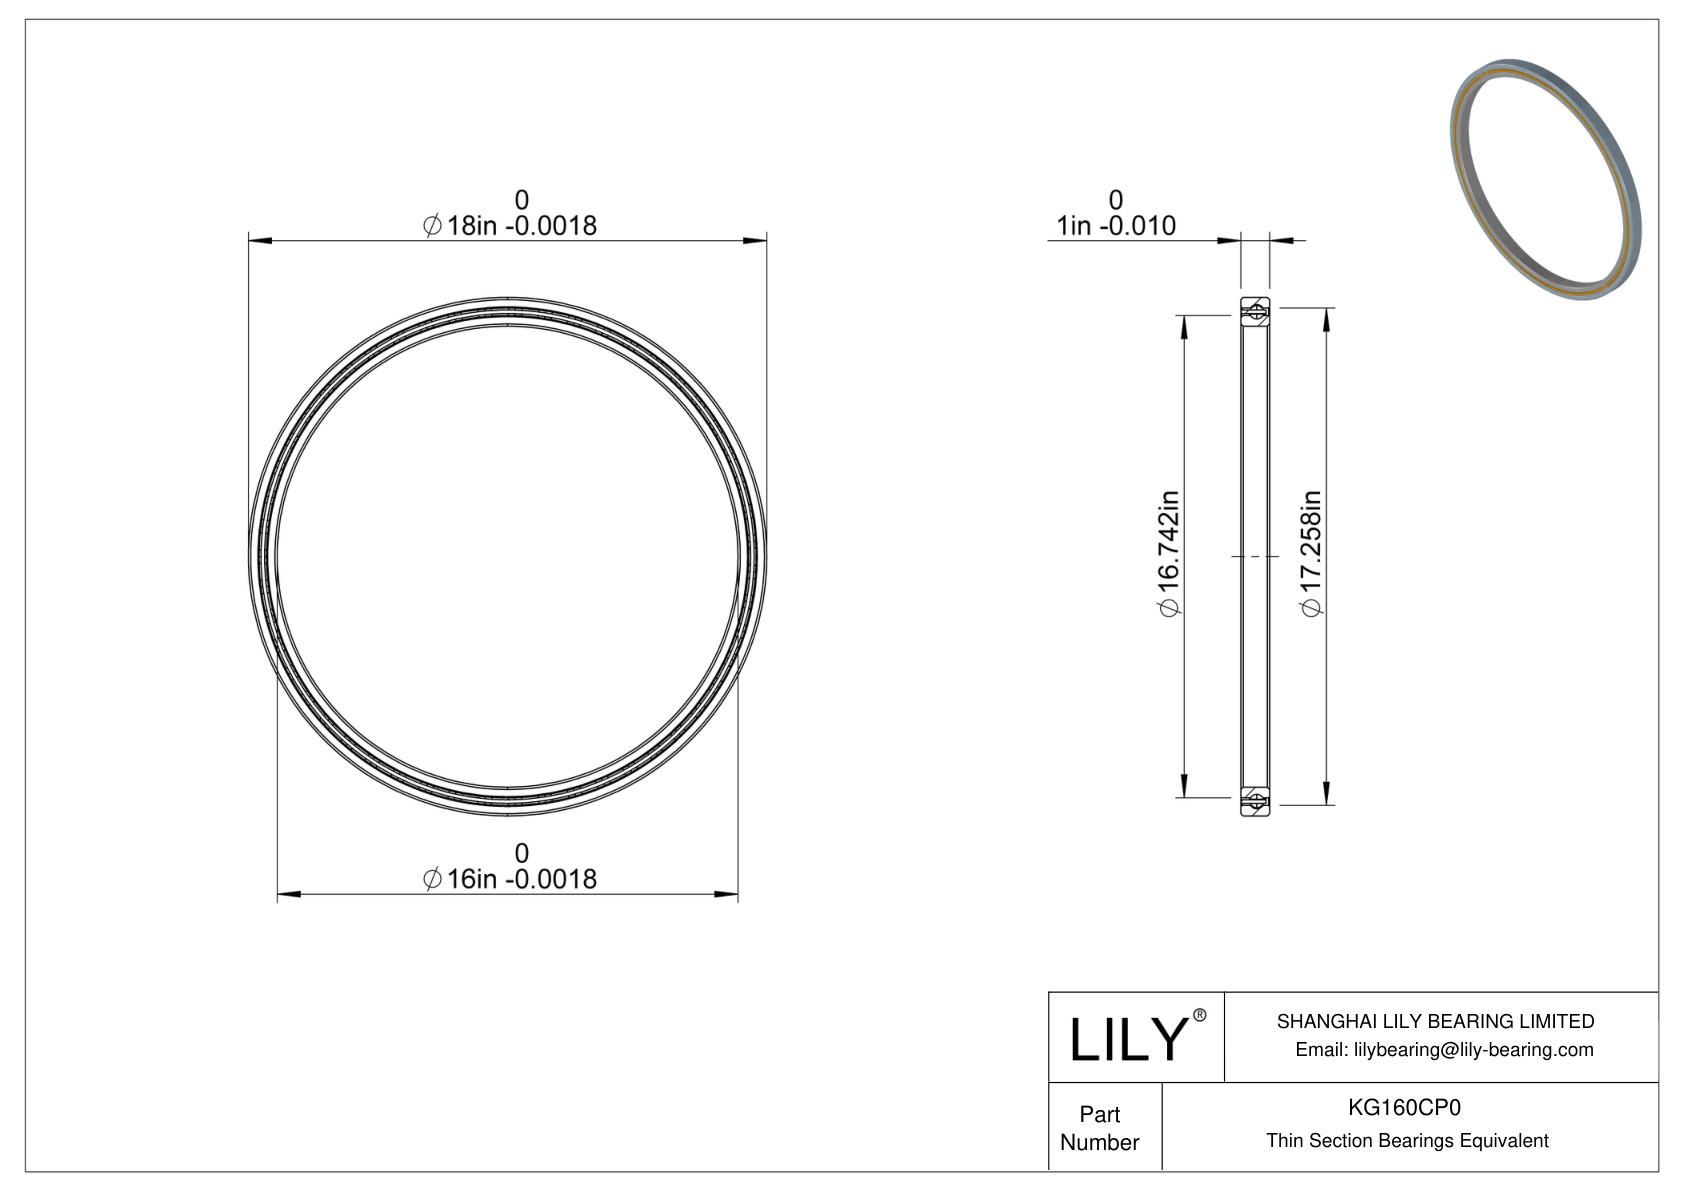 KG160CP0 Constant Section (CS) Bearings cad drawing